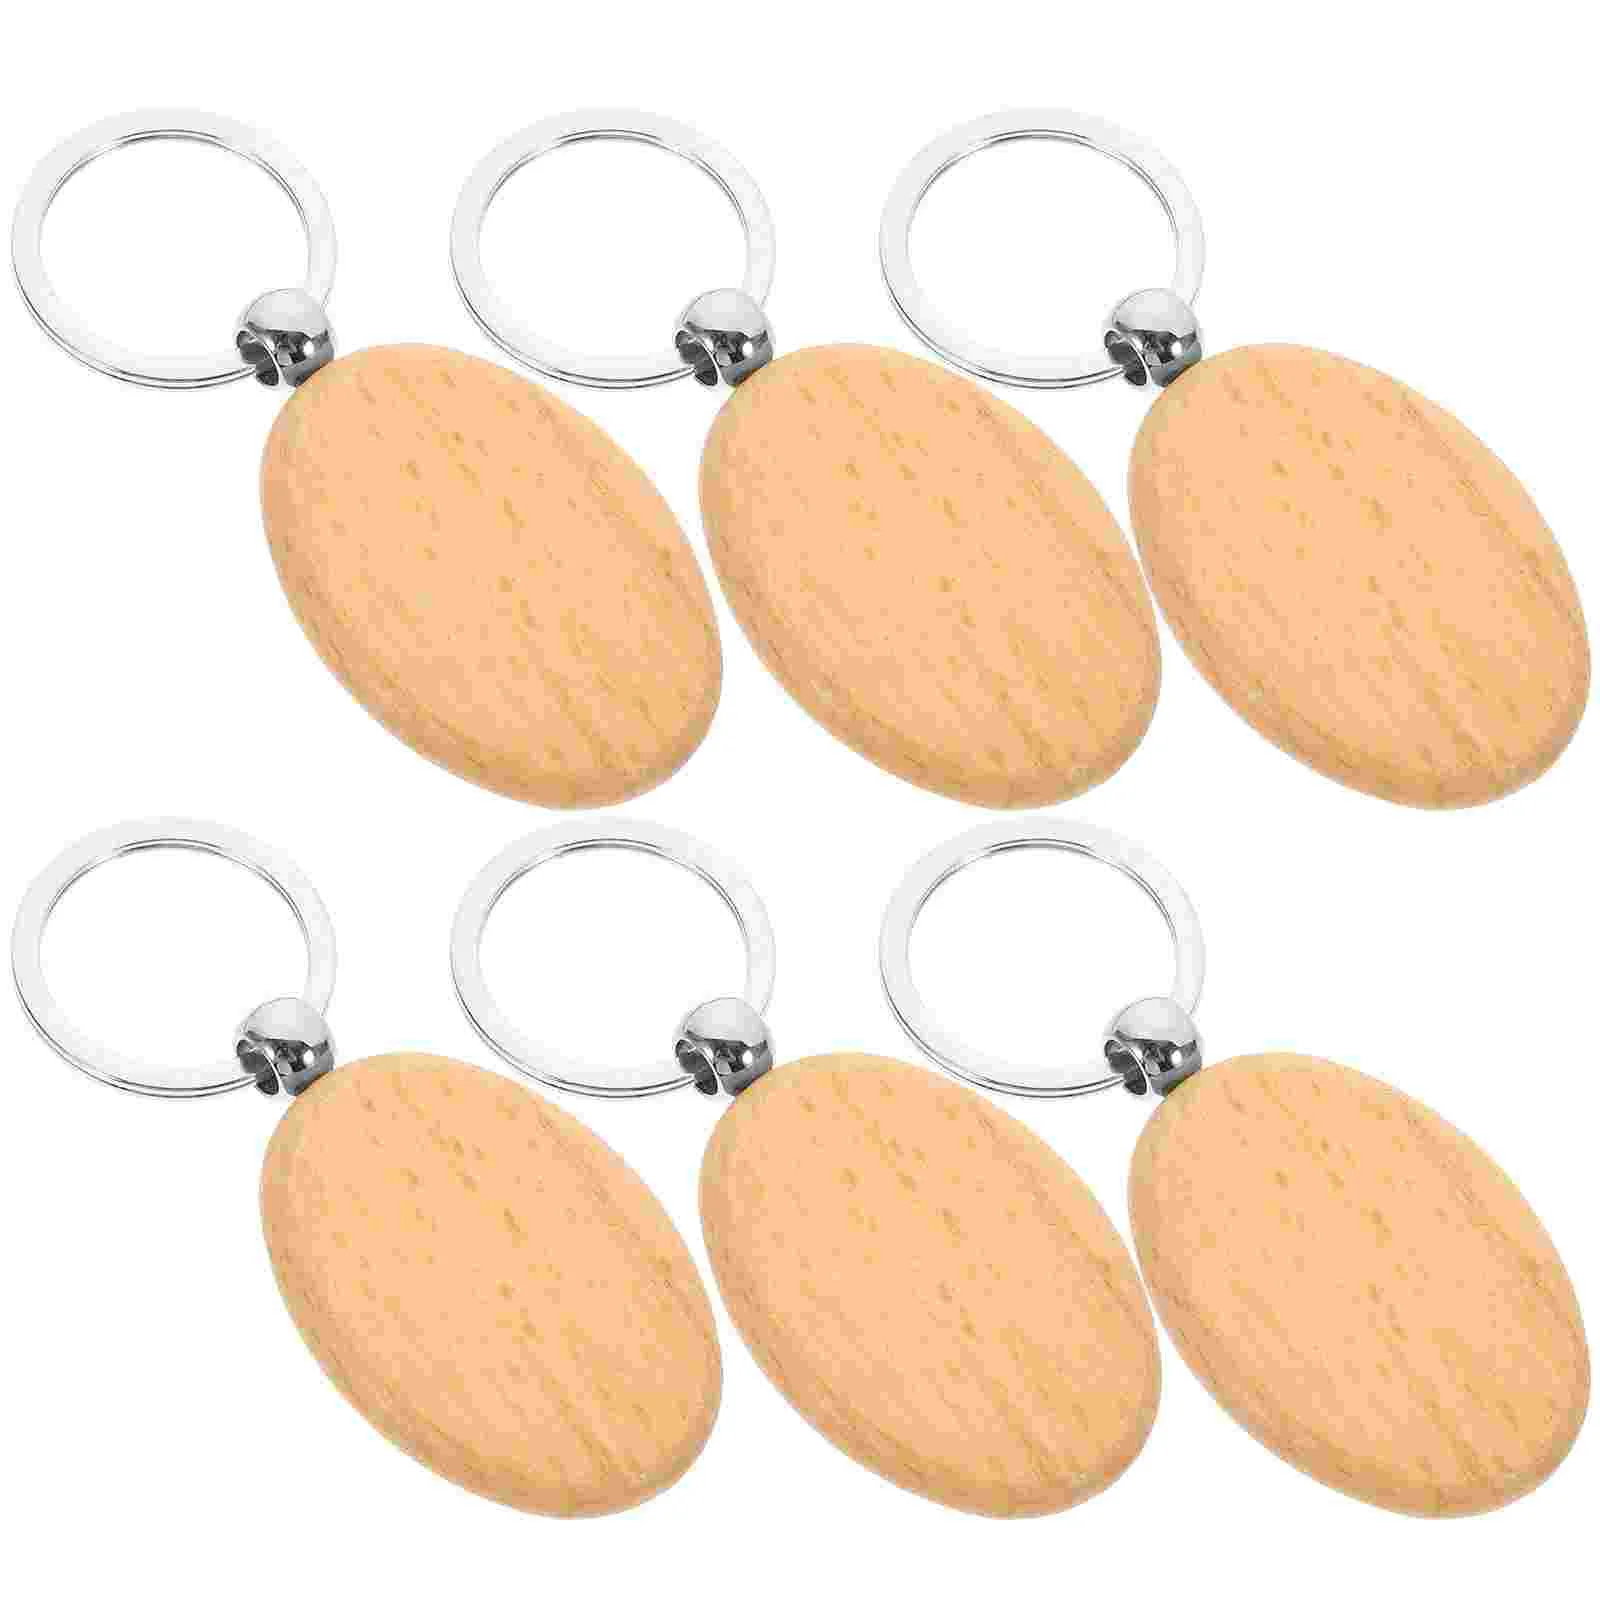 

Blank Wood Pendant Key Ring Wooden Holder Keychain Keychains Crafts Blanks Charm Engravable Car Fob